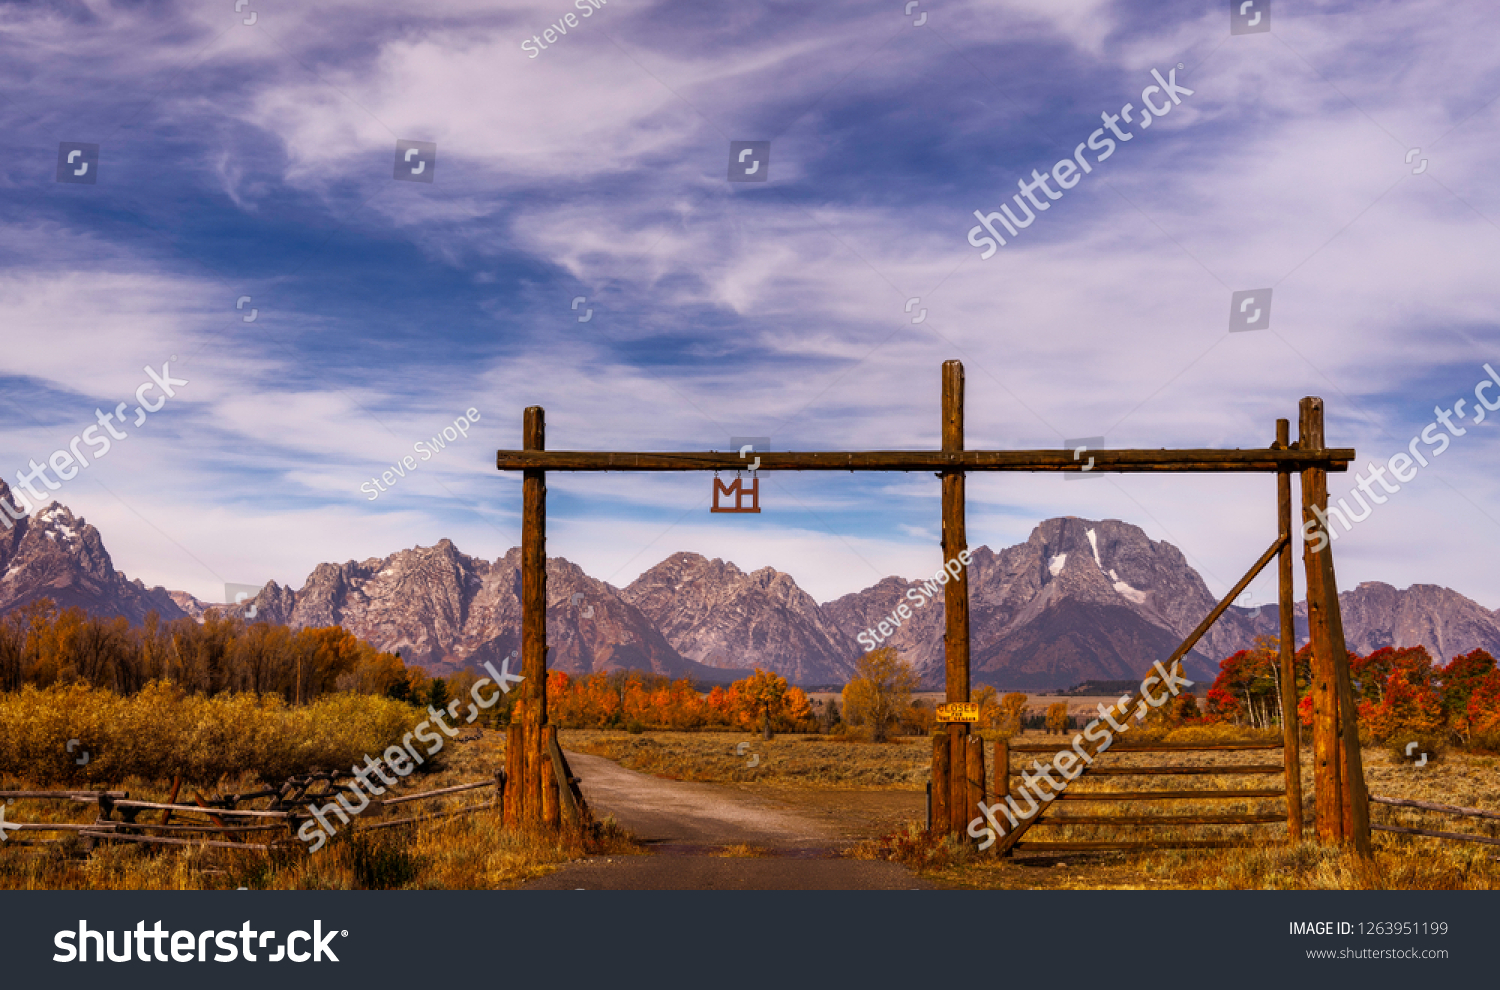 The MH Ranch, a dude ranch inside Grand Teton National Park is a popular stay for tourist. #1263951199